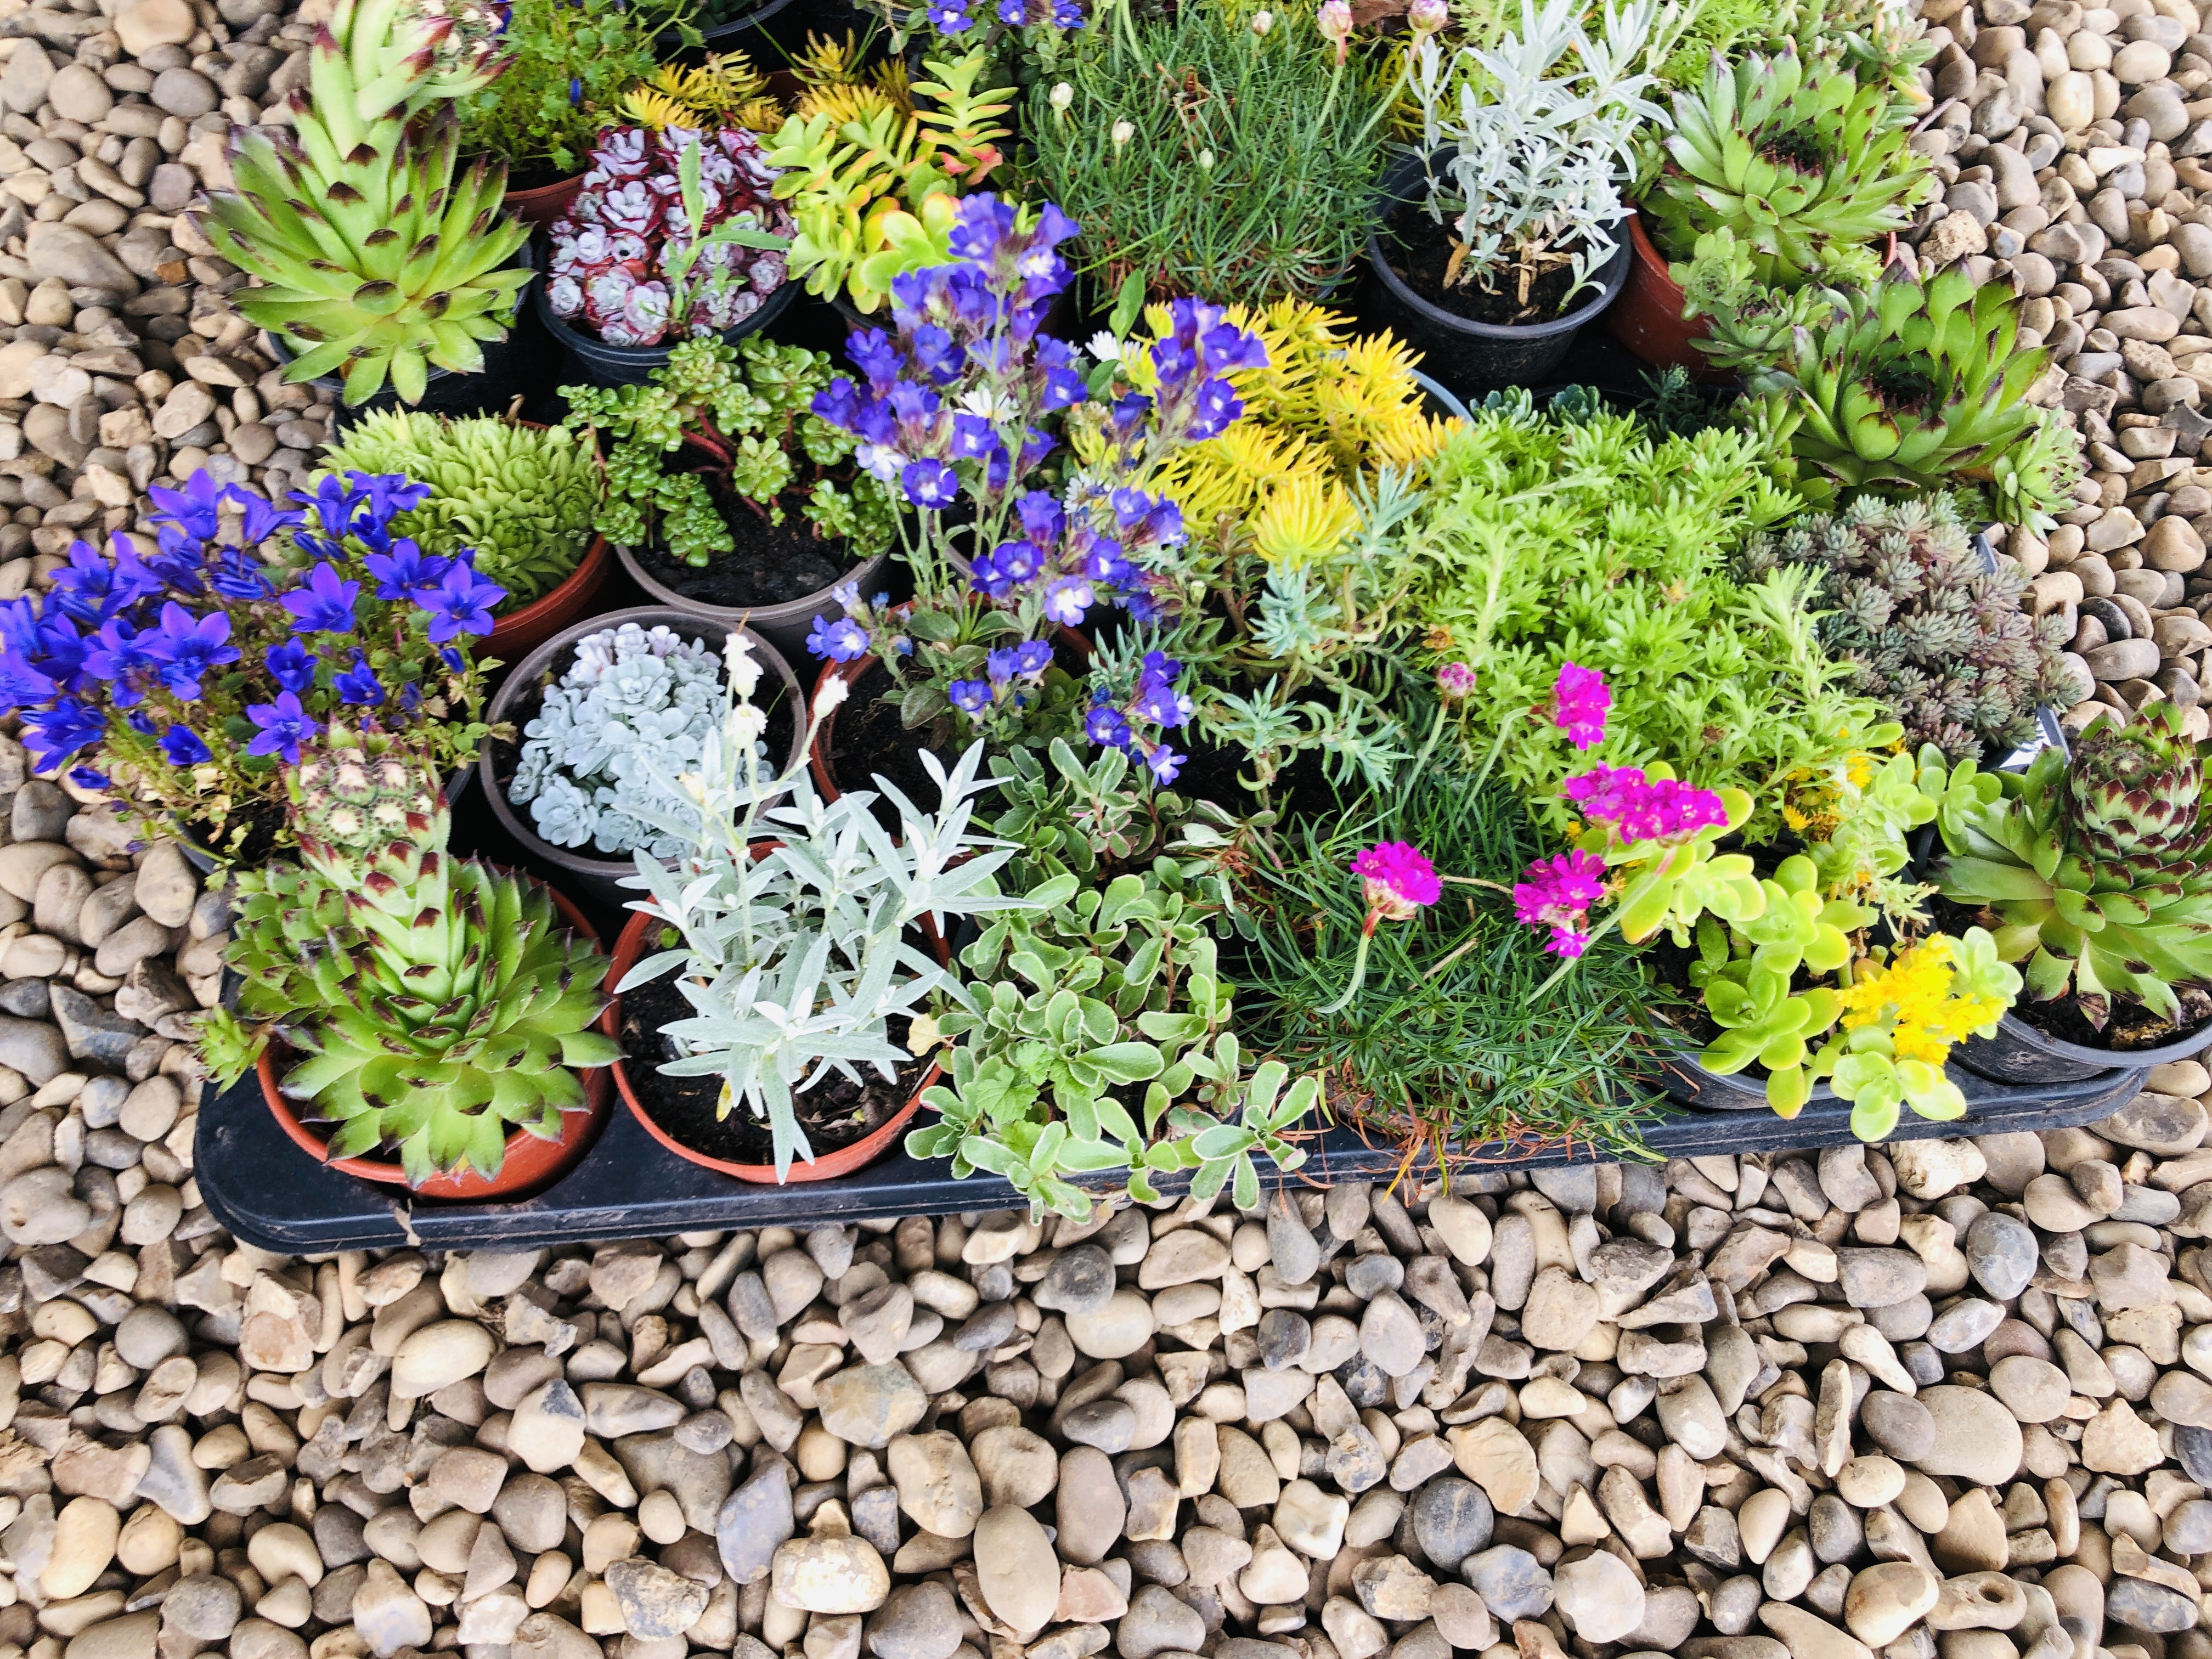 THREE TRAYS CONTAINING 18 POTTED ALPINE AND ROCKERY PLANTS. - Image 2 of 3